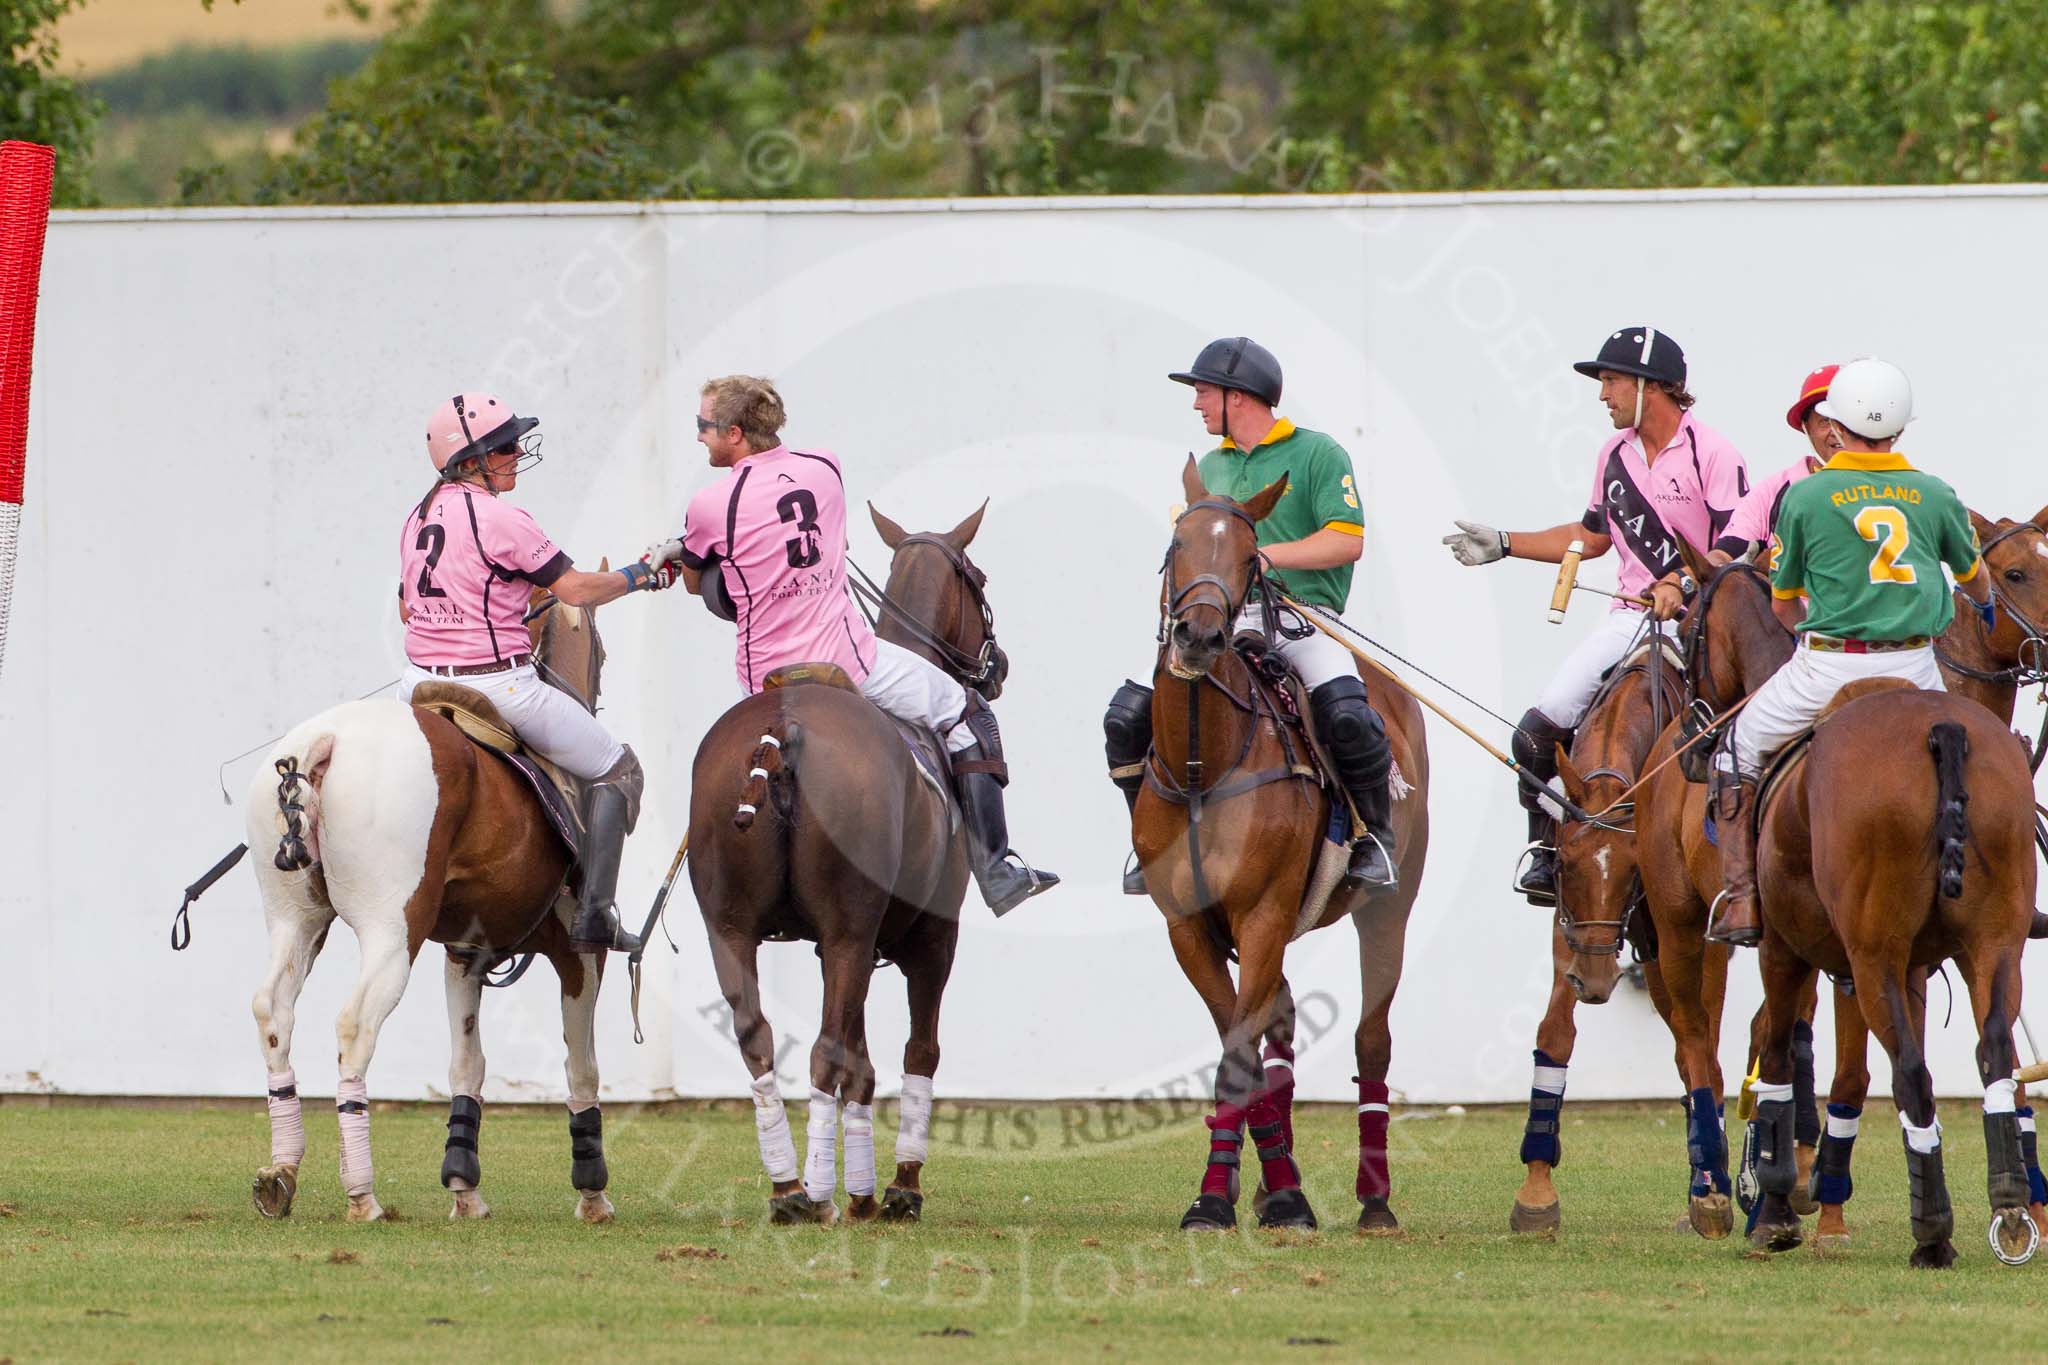 DBPC Polo in the Park 2013, Final of the Tusk Trophy (4 Goals), Rutland vs C.A.N.I..
Dallas Burston Polo Club, ,
Southam,
Warwickshire,
United Kingdom,
on 01 September 2013 at 17:10, image #644